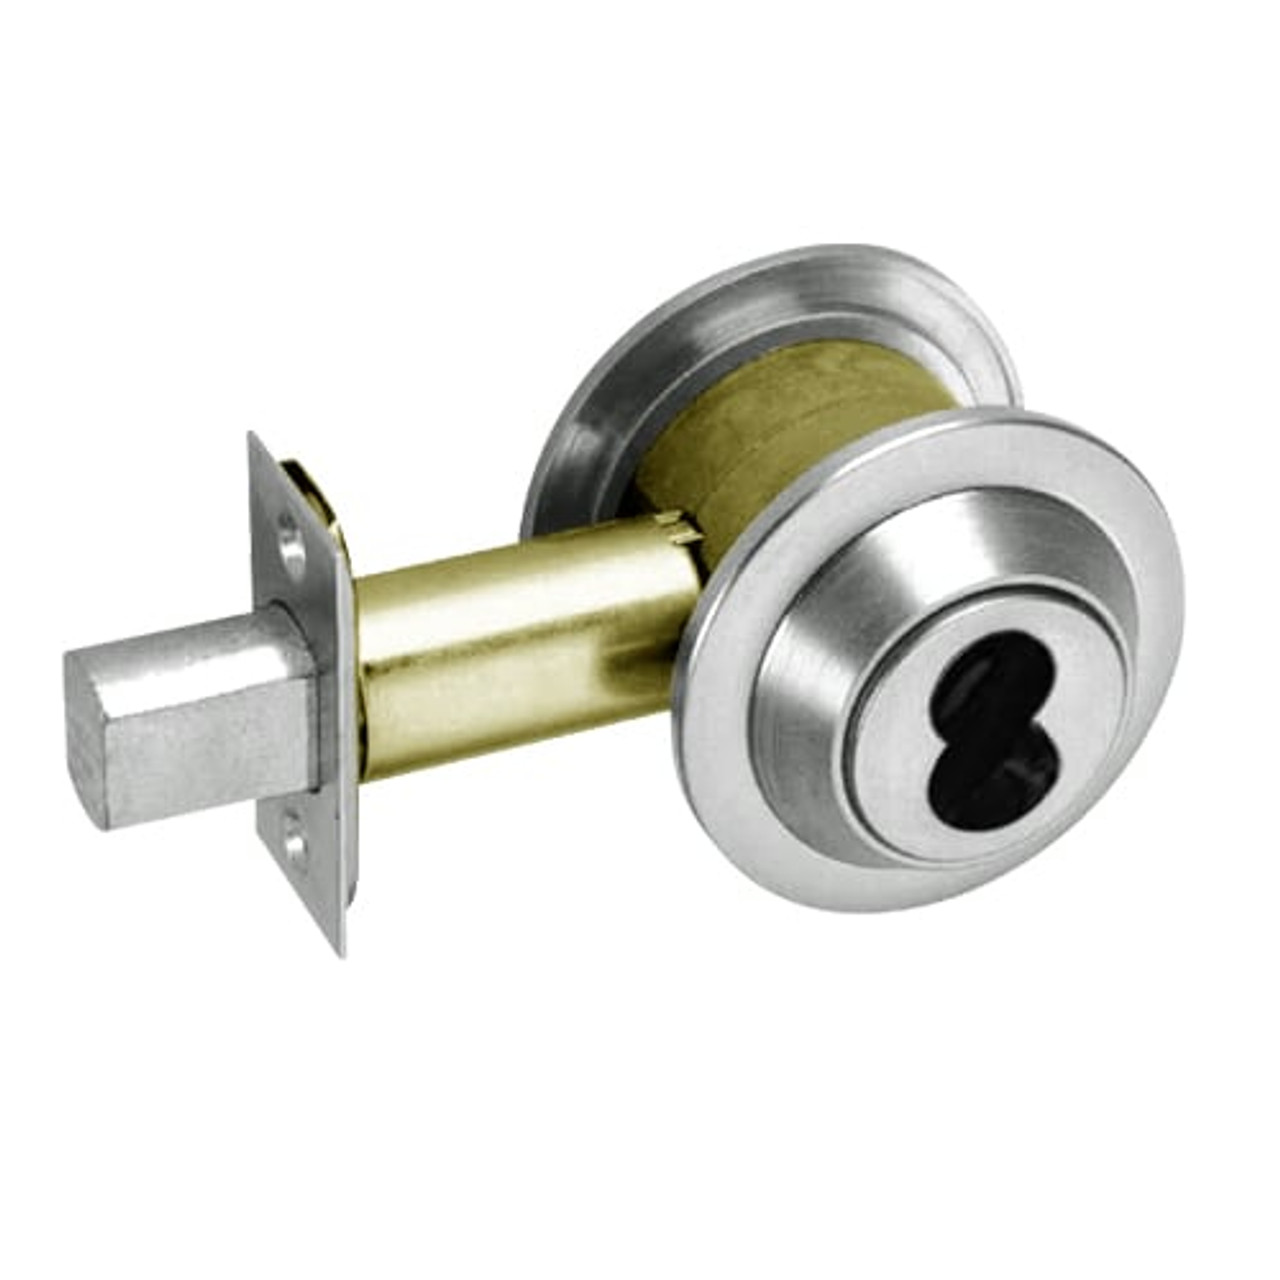 DL3013-618-CL6 Corbin DL3000 Series IC 6-Pin Less Core Cylindrical Deadlocks with Single Cylinder in Bright Nickel Finish